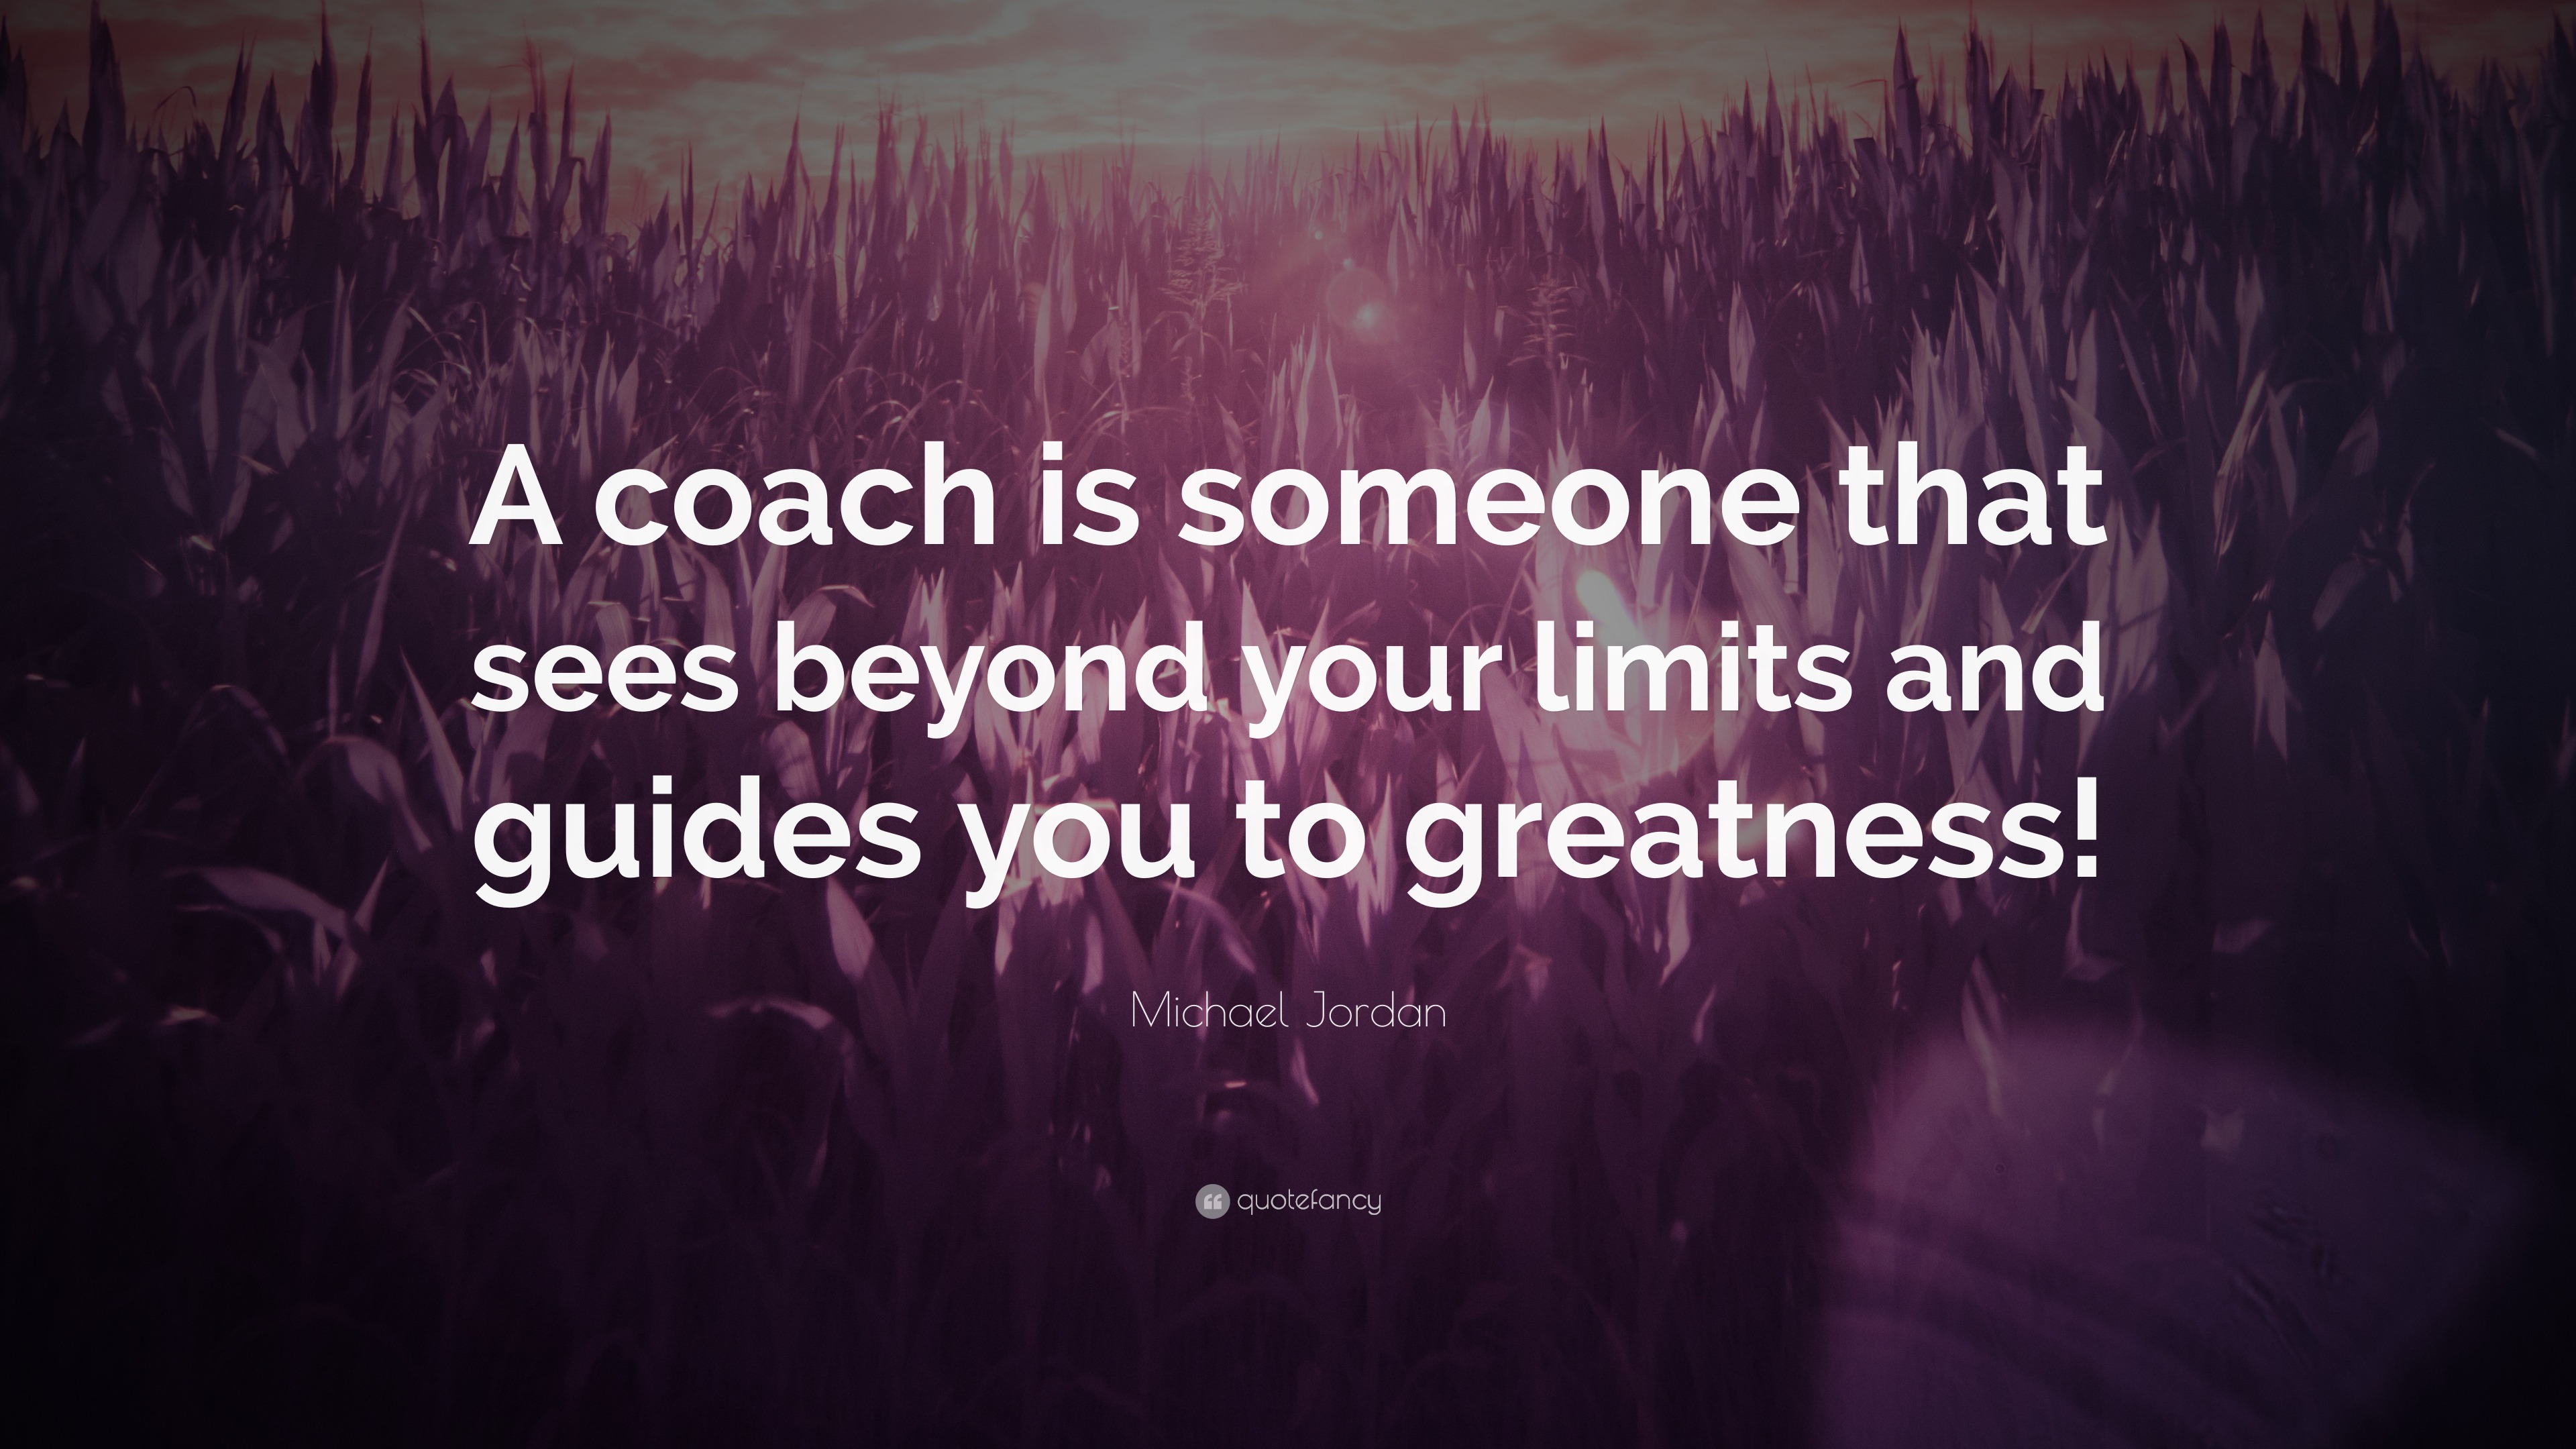 2087191 Michael Jordan Quote A coach is someone that sees beyond your